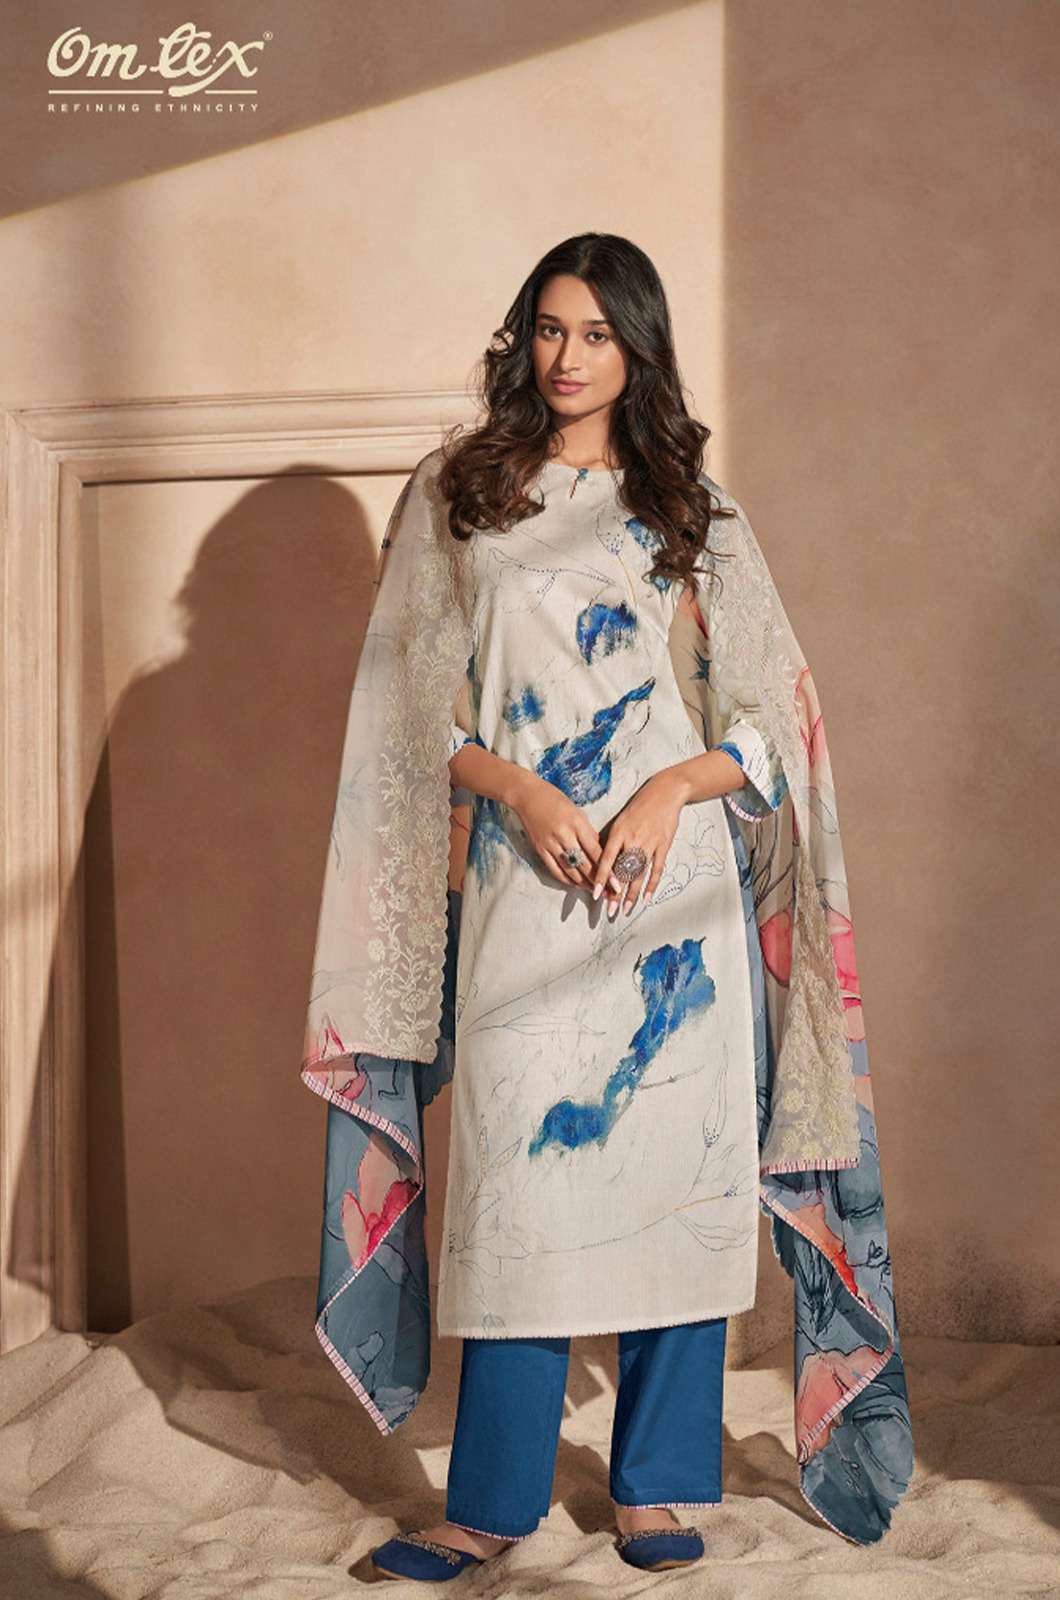  Omtex Praniti LAWN COTTON DIGITAL PRINT WITH HAND WORK SUIT